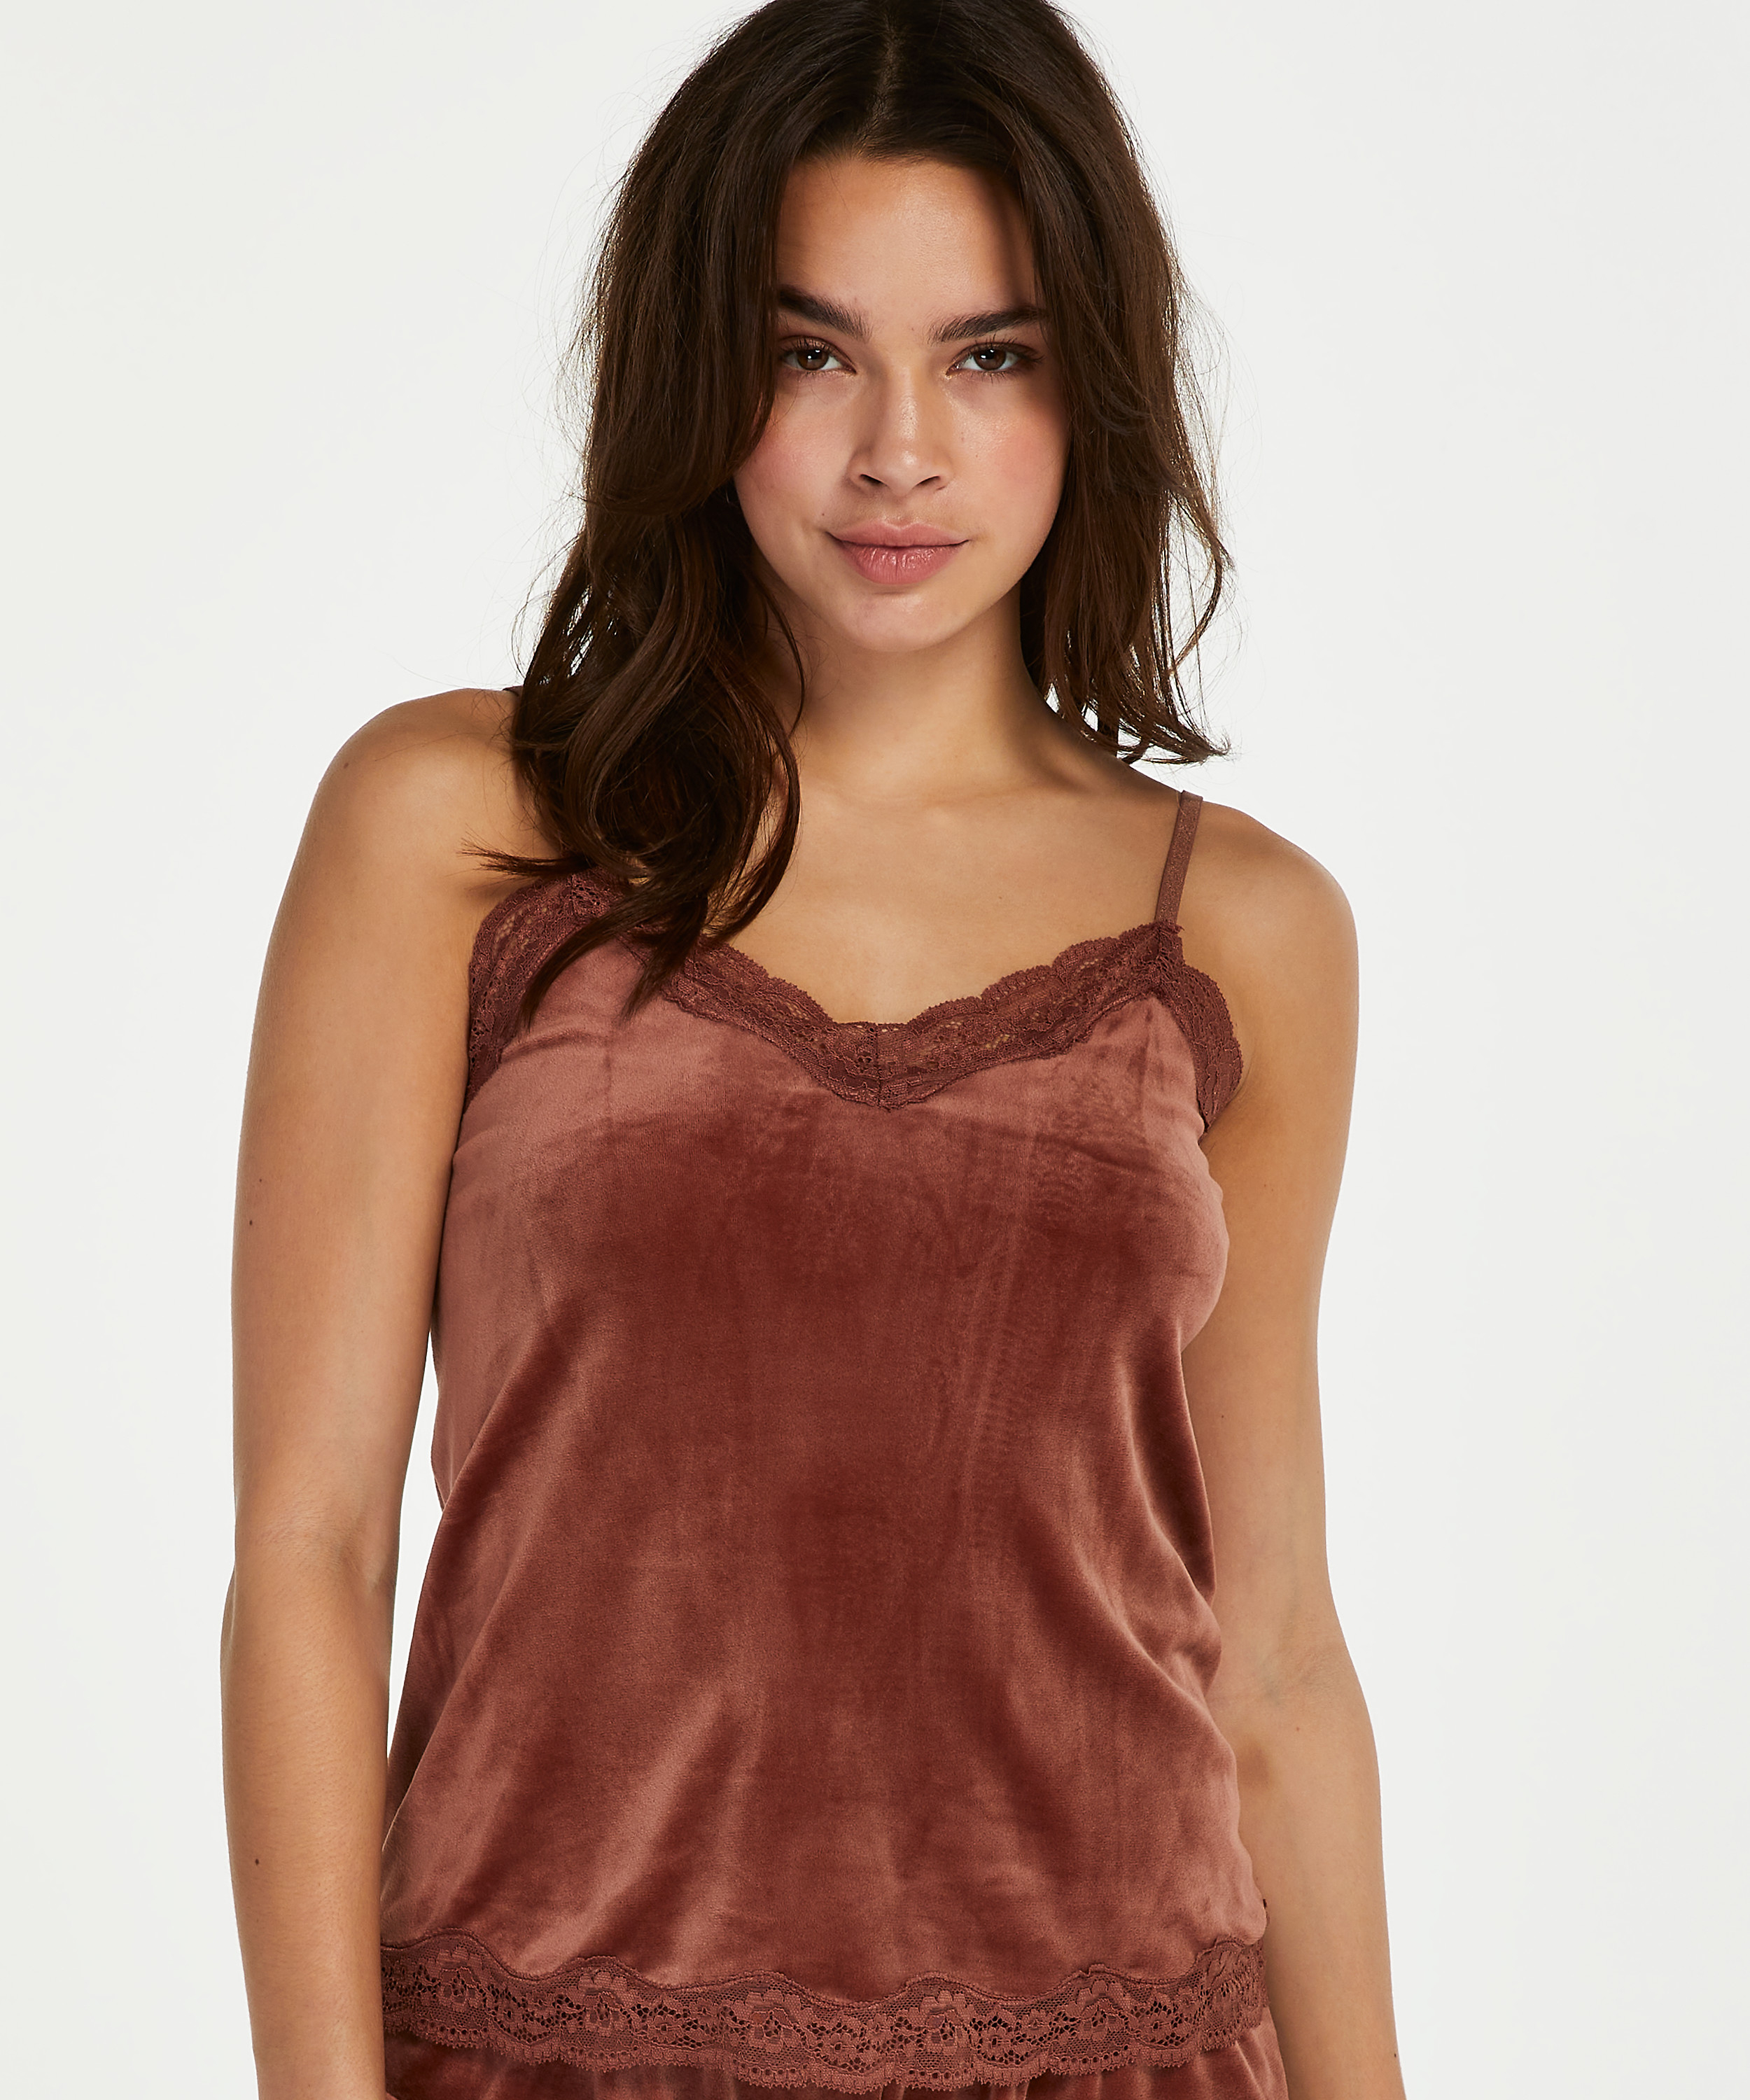 Cami Velour Lace, pink, main